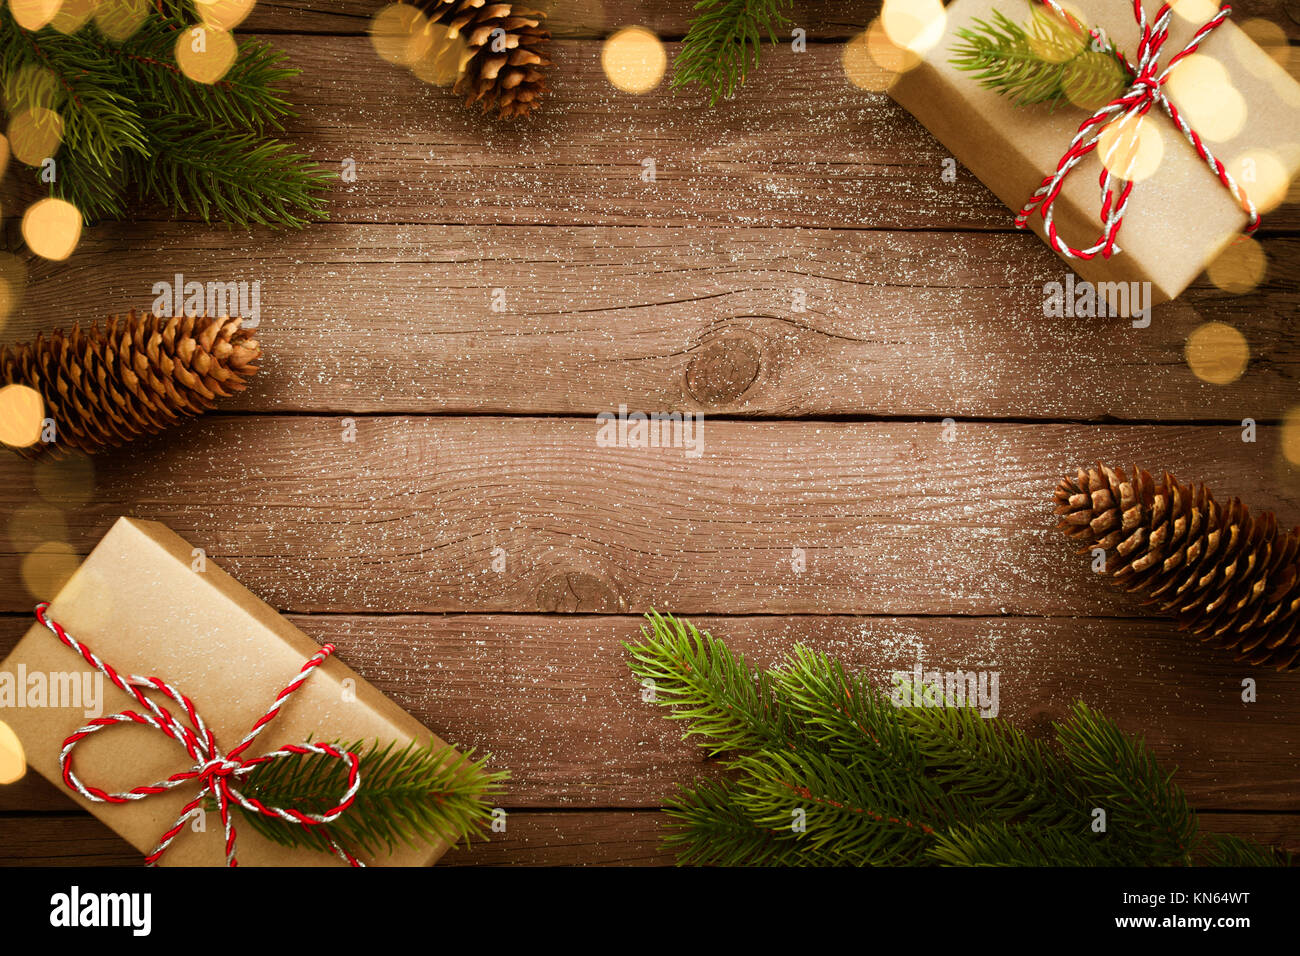 Christmas presents in kraft box on vintage wooden table with decorations. Top view Stock Photo